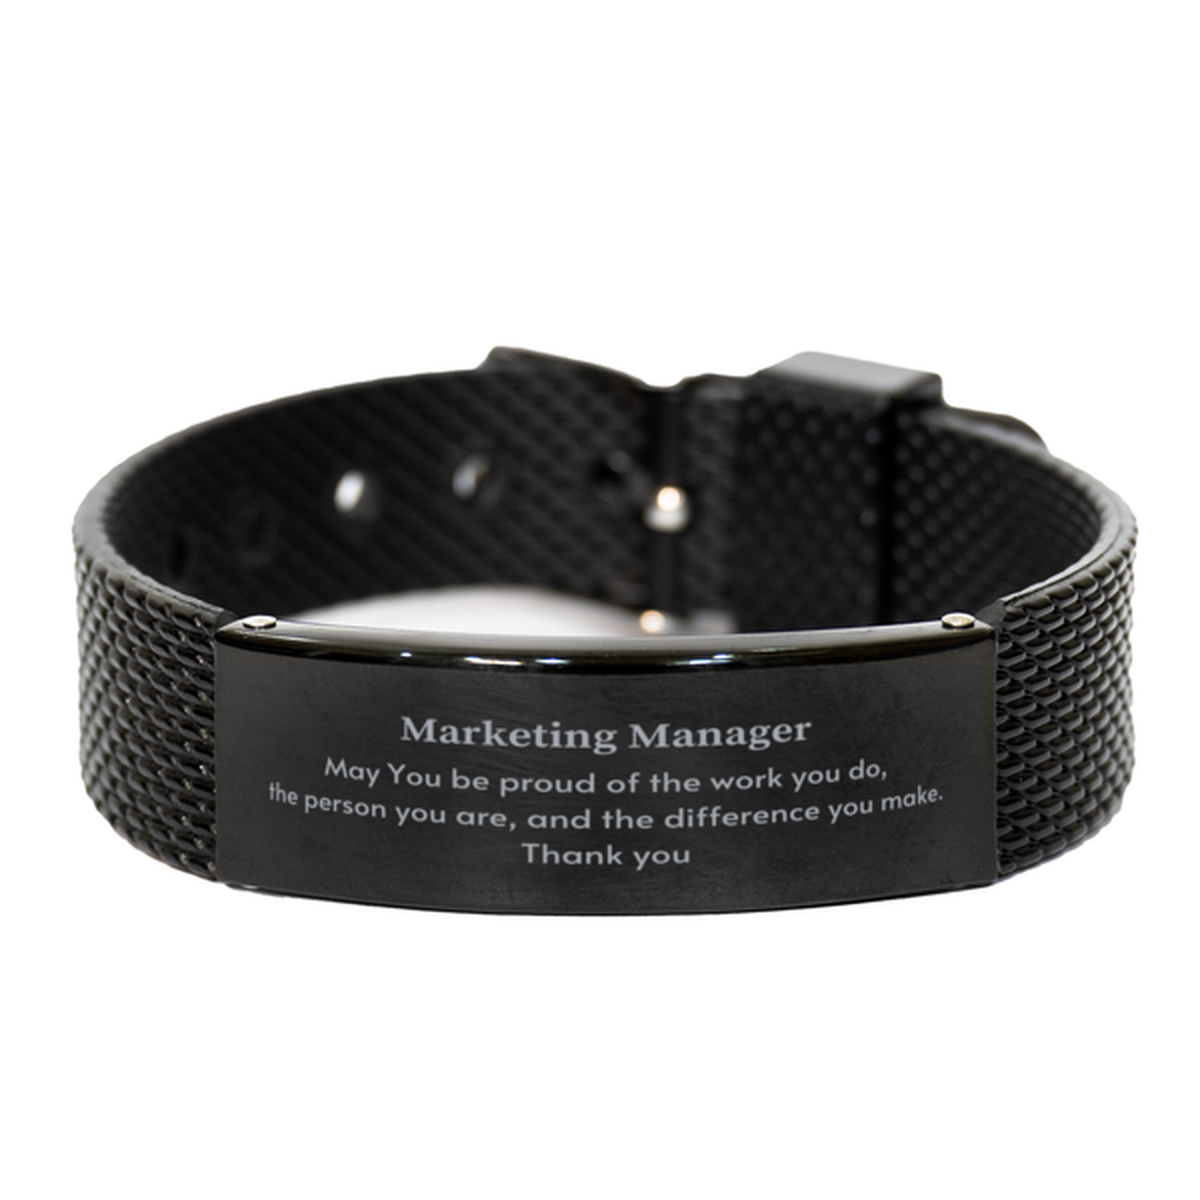 Heartwarming Black Shark Mesh Bracelet Retirement Coworkers Gifts for Marketing Manager, Marketing Manager May You be proud of the work you do, the person you are Gifts for Boss Men Women Friends